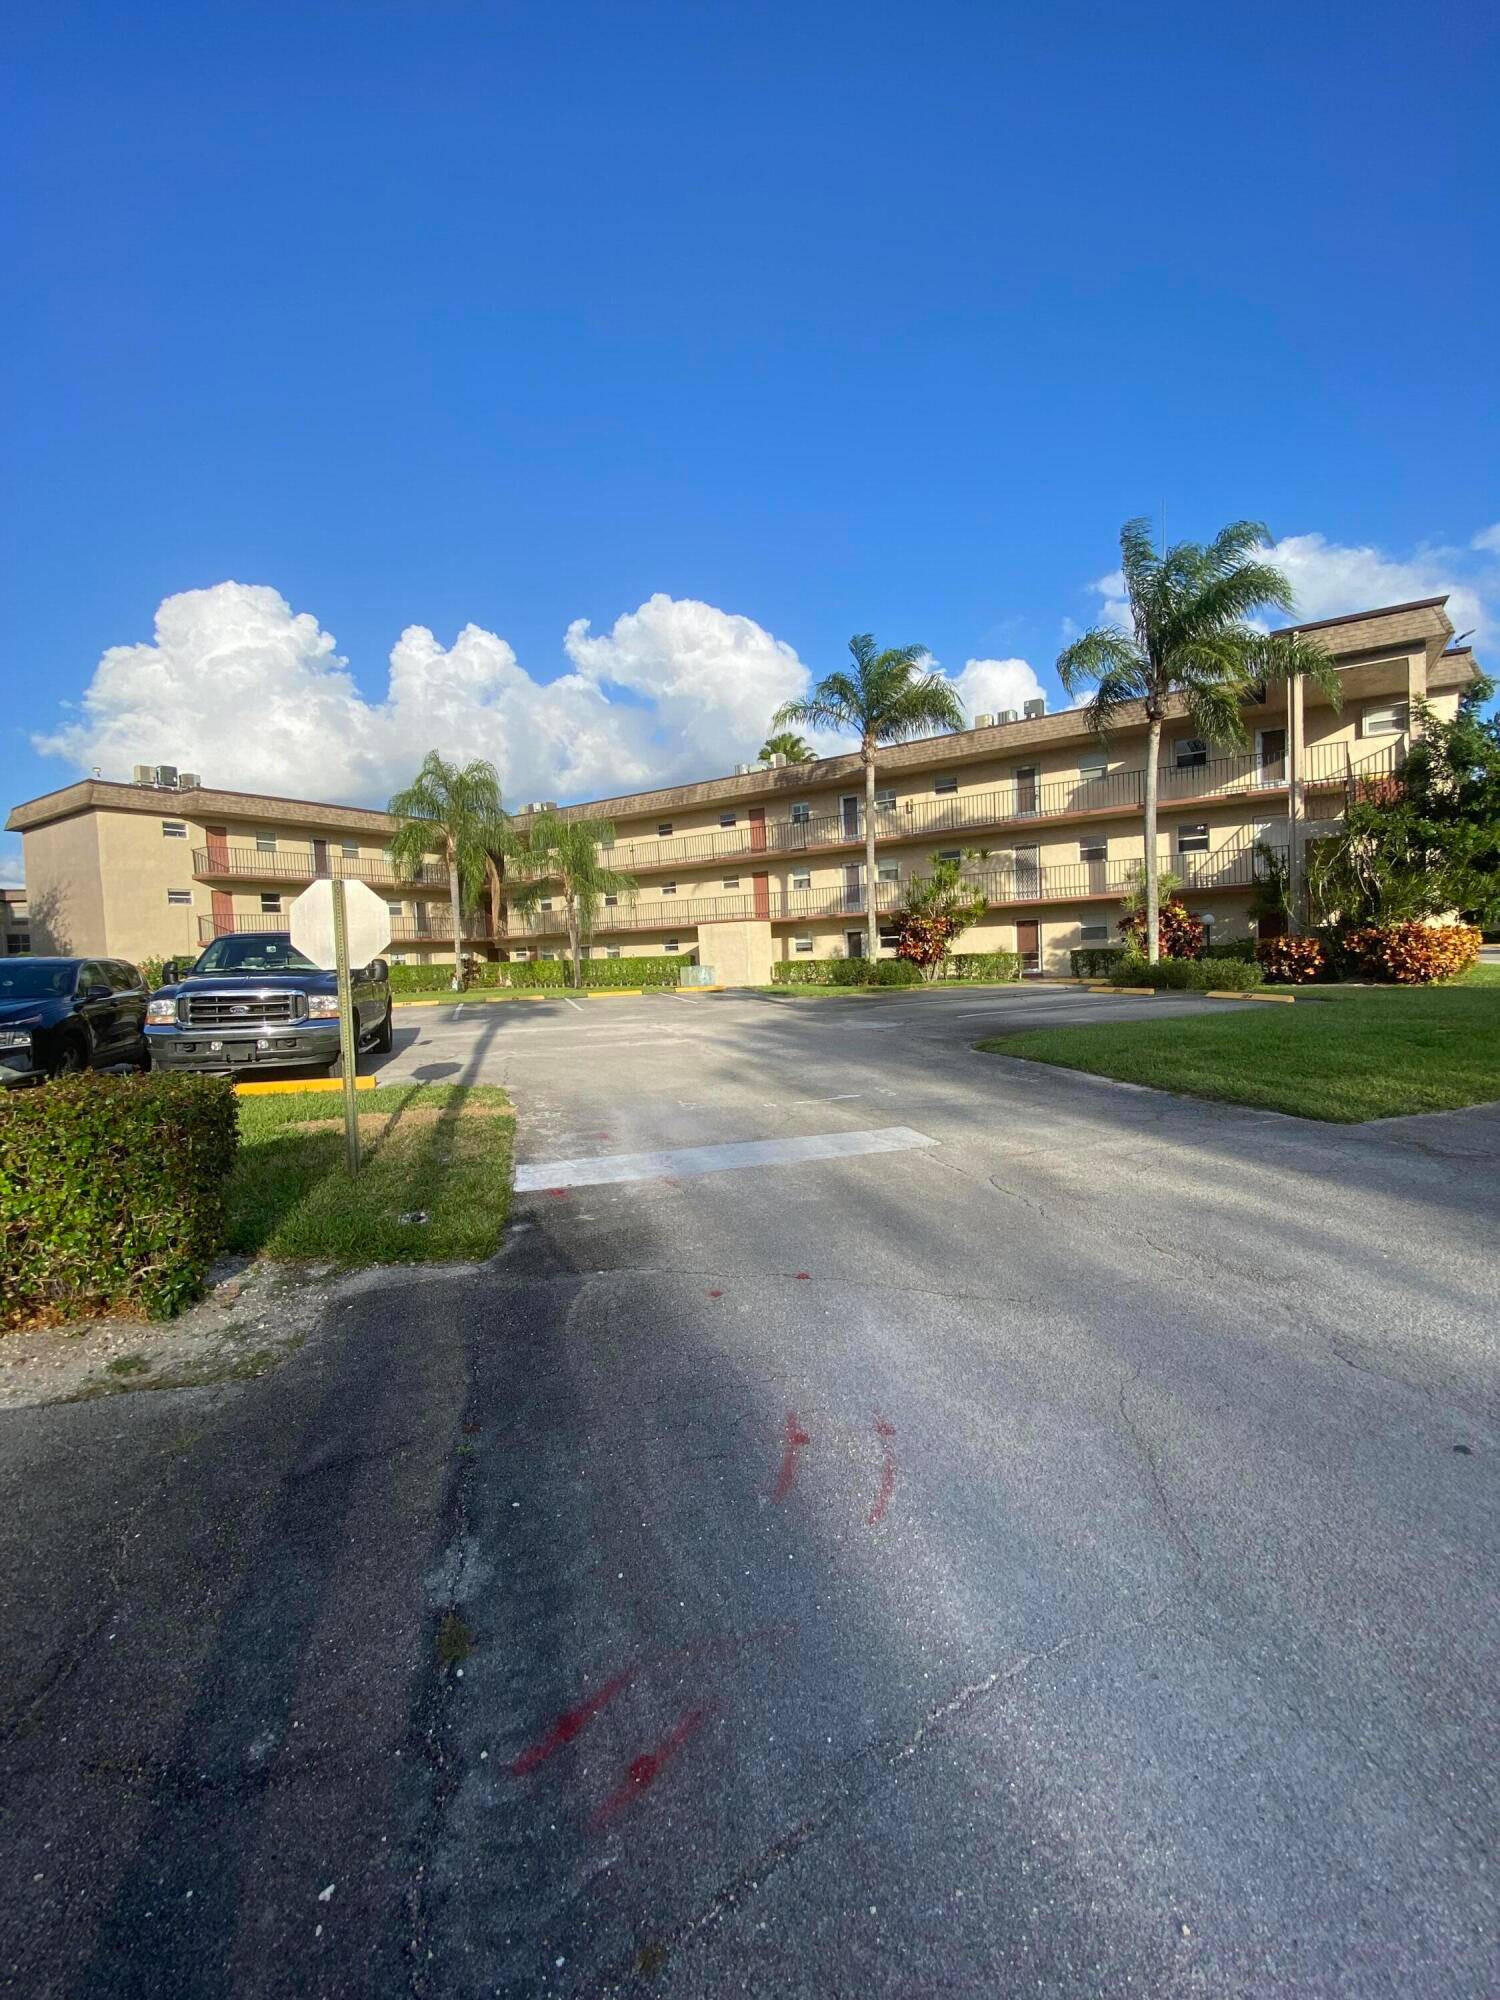 This immaculate 1 bed 1 bath unit is in a 55 community large walk in closet Enclosed patio area with storage closet Tons of amenities include community pool, clubhouse with ...